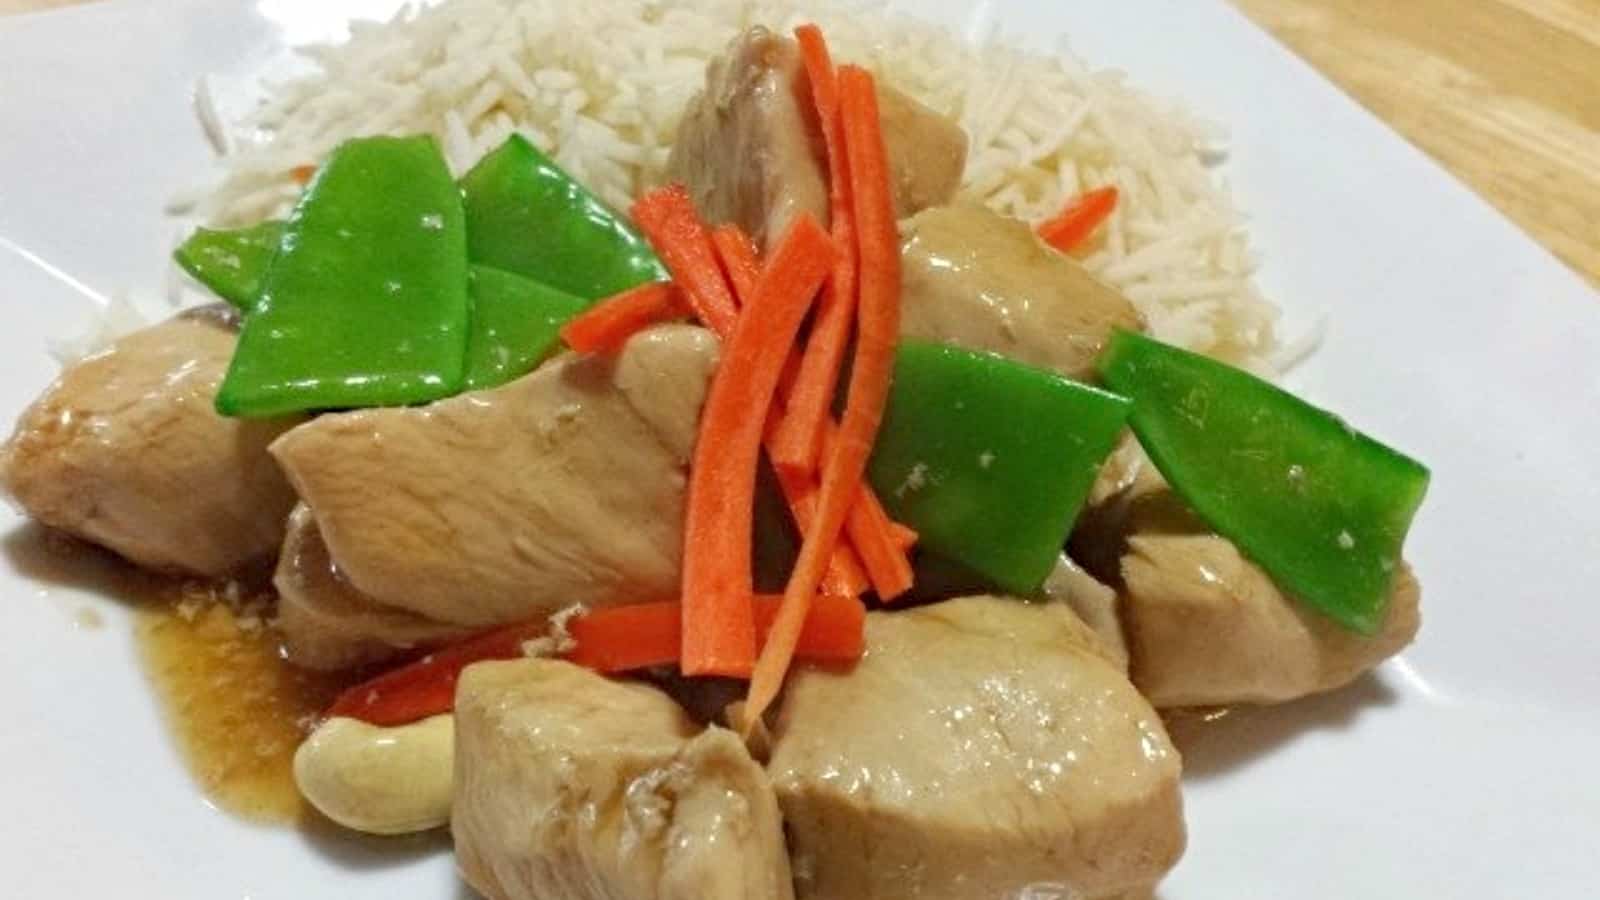 Image shows Cashew chicken on a white plate garnished with carrots and snow peas.